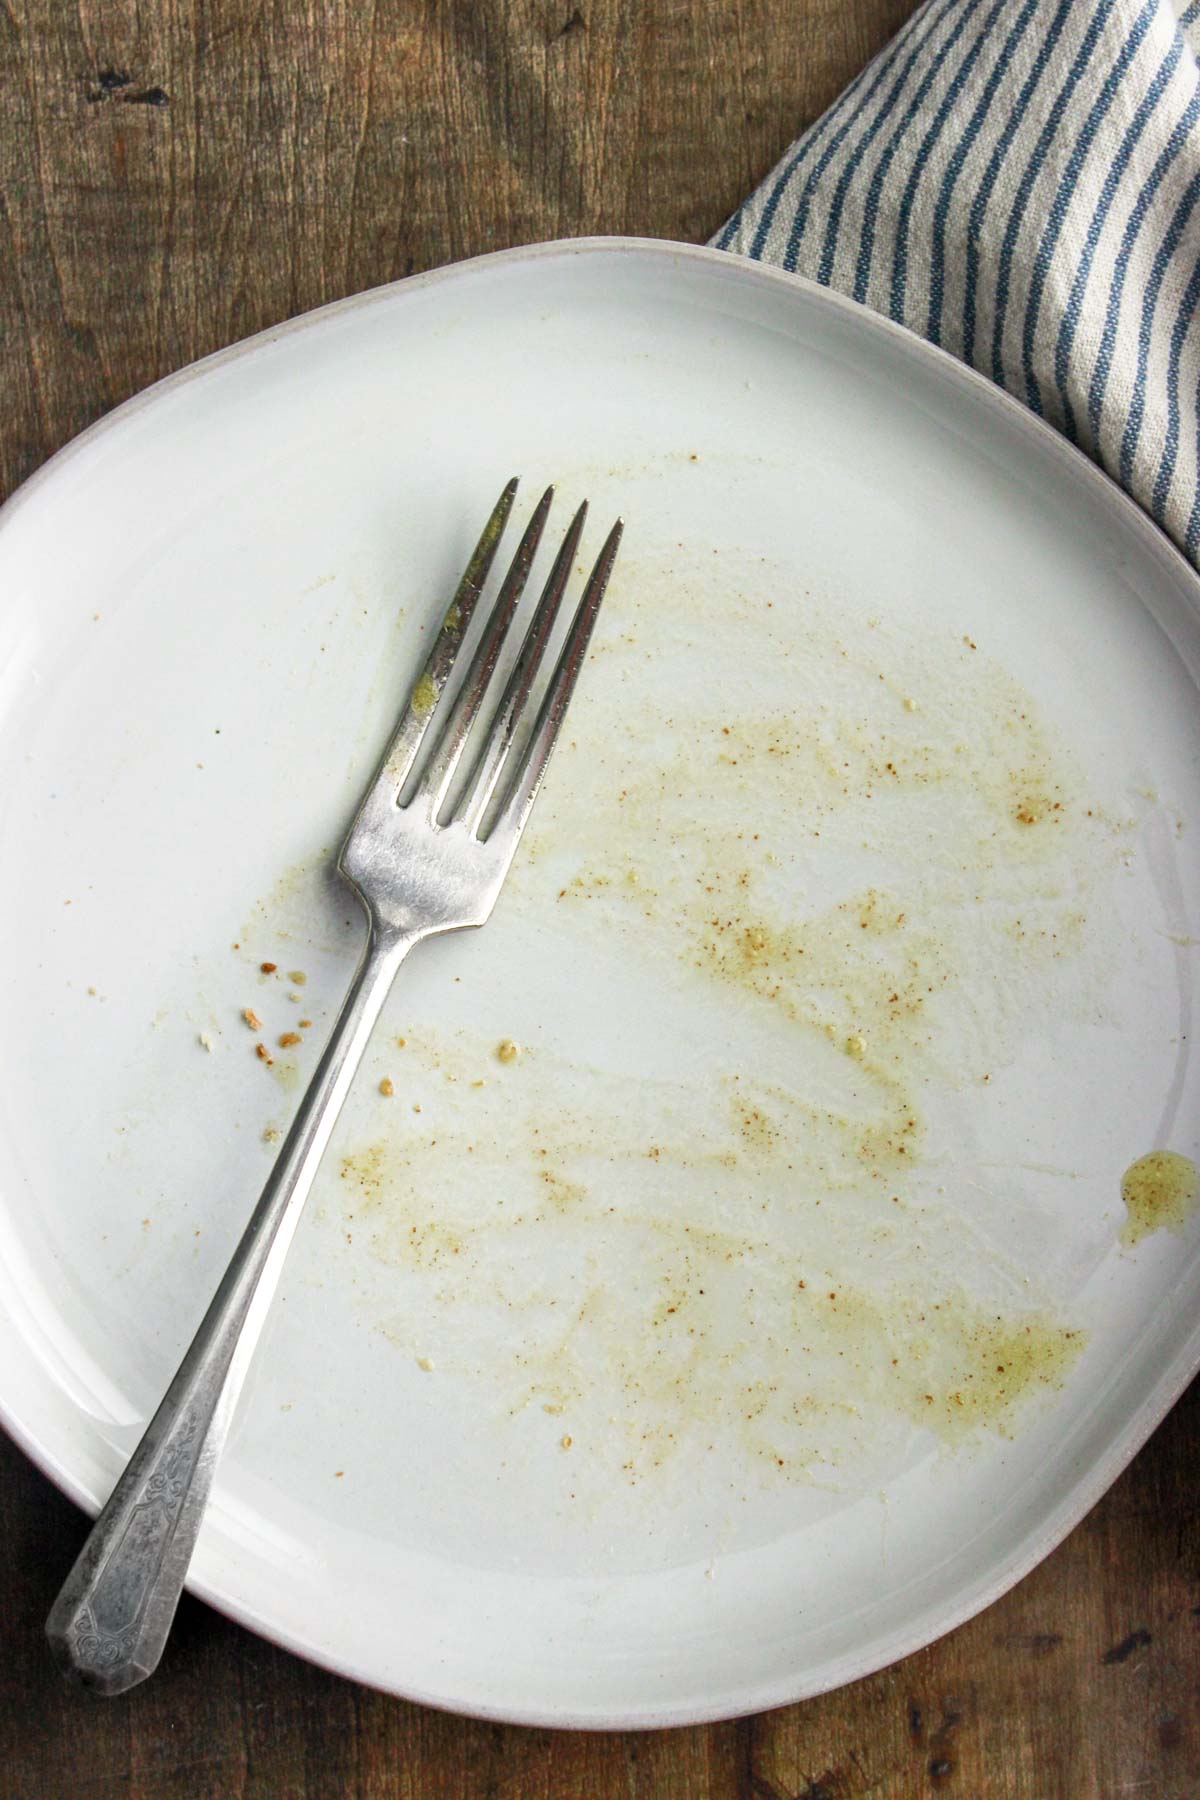 Empty plate after eating the Salanova® salad and sopping up the vinaigrette with bread.